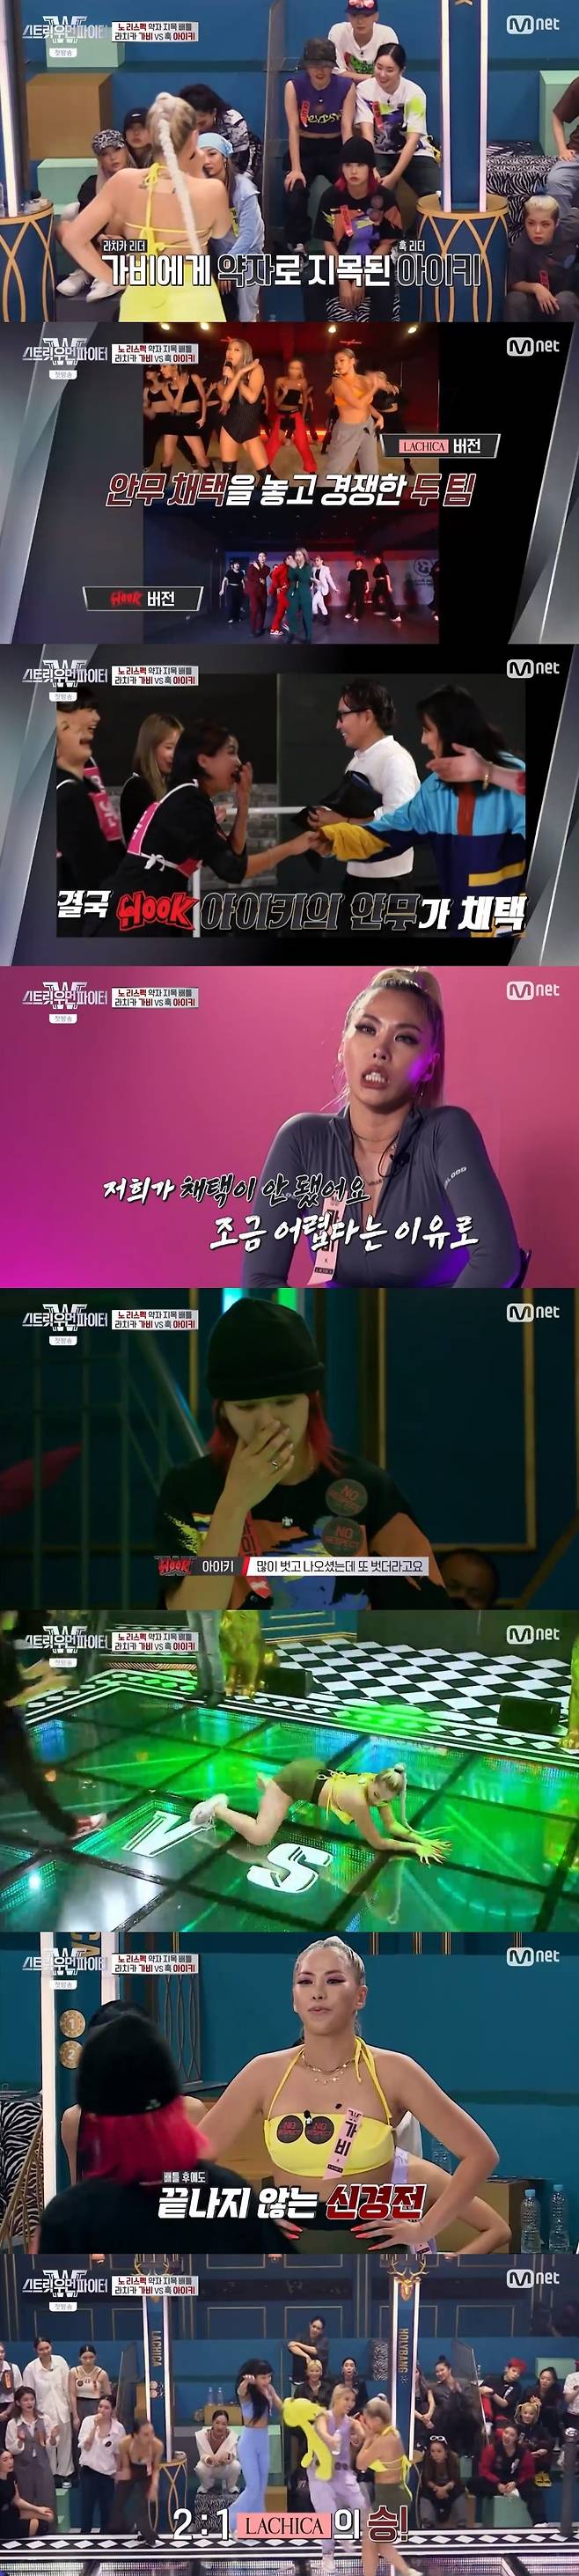 Seoul) = iKey was embarrassed by GABEEs provocation.In Mnets new entertainment program Street Woman The Fighter broadcasted on the 24th, Rachikas GABEE sent a look at the head of Hooks iKey, causing curiosity.GABEE gave iKey a cold look as soon as it appeared, and there was a subtle airflow between them.Following GABEE, which emphasizes sexy, revealing his heart and bringing the atmosphere in an instant.In iKeys jovial response, GABEE avoided looking and then launched a provocation again: GABEE, which showed sexy dance.IKey danced a timid hairy dance and laughed, I do not have any hair, Im sorry.The video evaluation that iKey had taken in advance was released. He saw Lachikas dance and said, Nat is not sexy. Real sexy is inner sexy.GABEE, who saw it, was displeased, saying, I am sexy when I take off.GABEE pointed to iKey without worrying in the one-on-one point battle that day, and iKey opened up what happened between the two.I think theres still a lot of money left for (GABEE) Refund Sisters, he said.Earlier it was reported that the two Crewes competed for the adoption of Refund Sisters choreography; eventually, choreography created by iKey Crewe was adopted.GABEE said, Our choreographer has not been adopted, because it is a little difficult.I dont know why Im so greedy, but I think its only a provocation and Ill win, iKey said, determined to say, GABEE will win too.In this confrontation, which was held in tension, GABEE beat iKey, who showed off her sexy charm with a weapon.Meanwhile, Street Woman The Fighter is a reality survival program to find Koreas best street dance crewe, and it is broadcast every Tuesday at 10:20 pm.